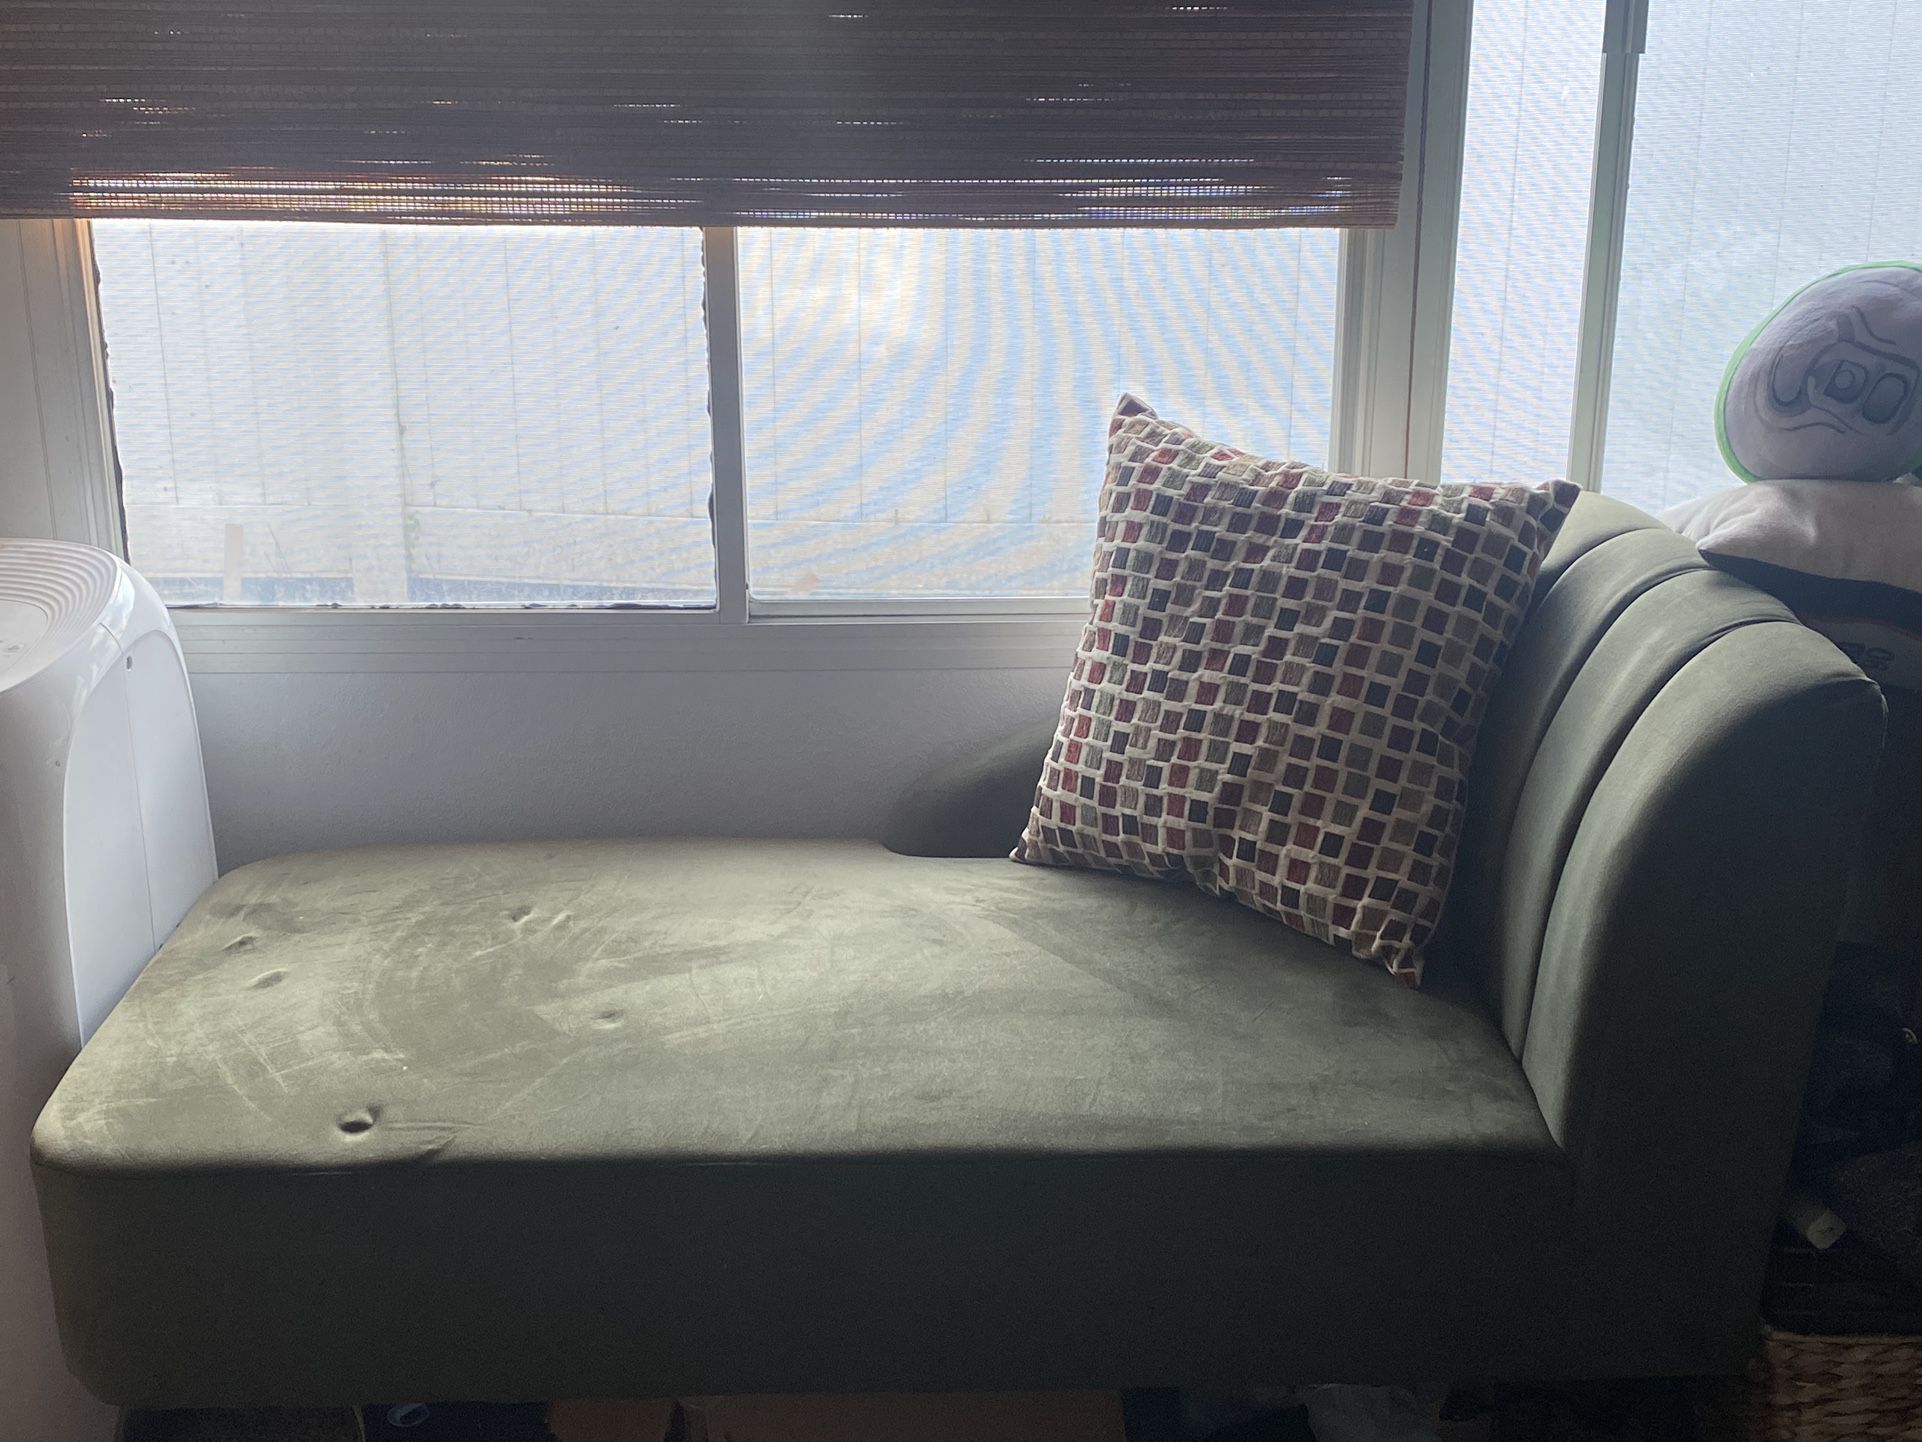 Small green window couch